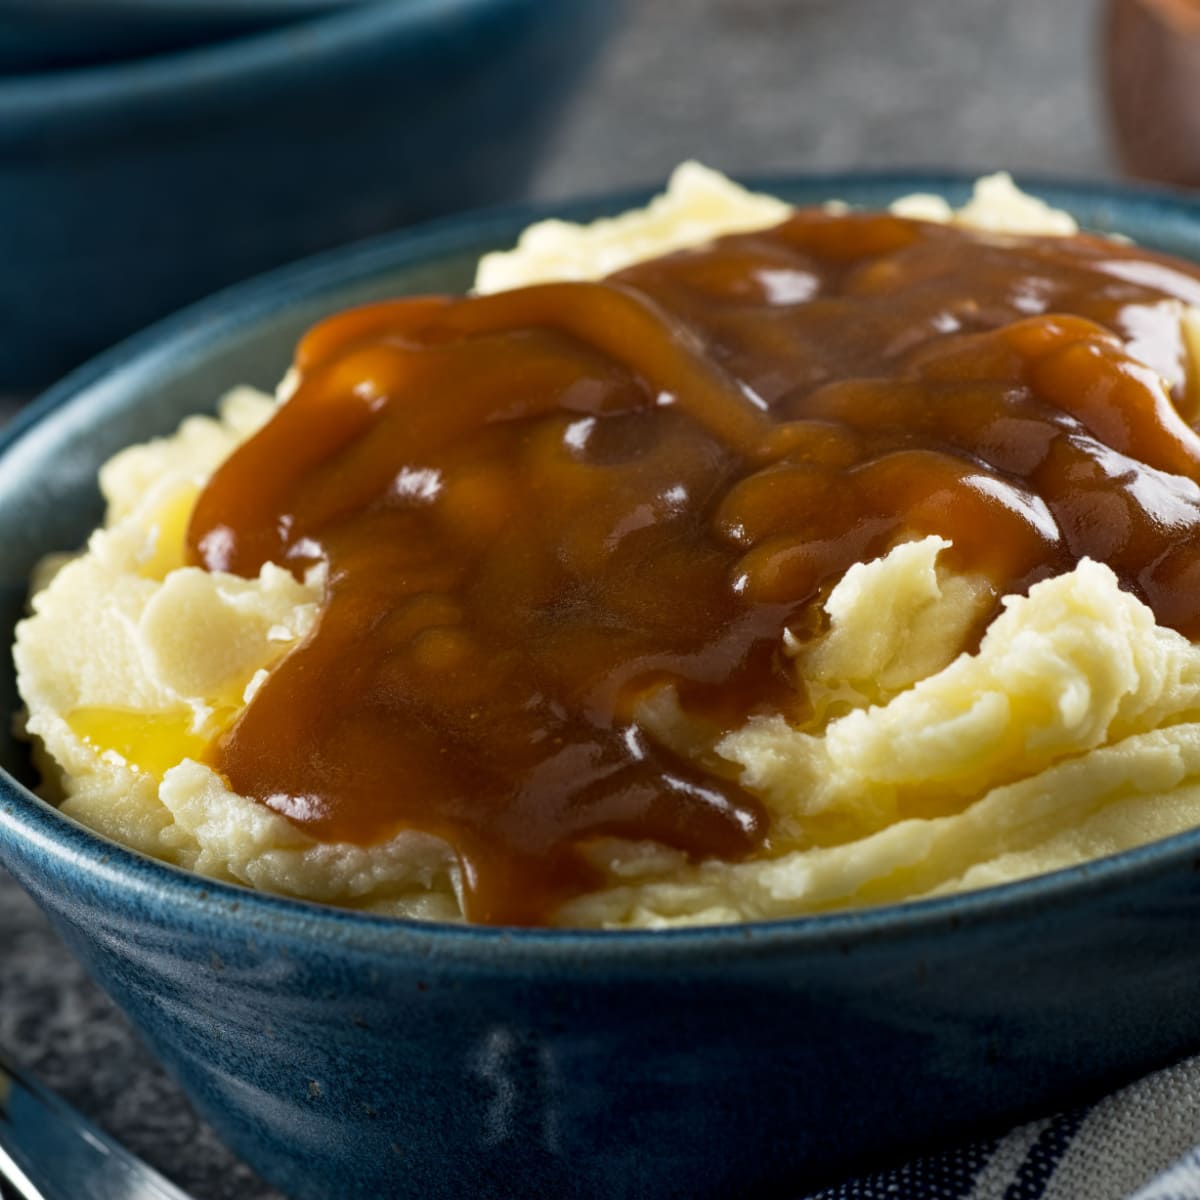 Bowl of Mashed Potatoes with Butter and Brown Gravy